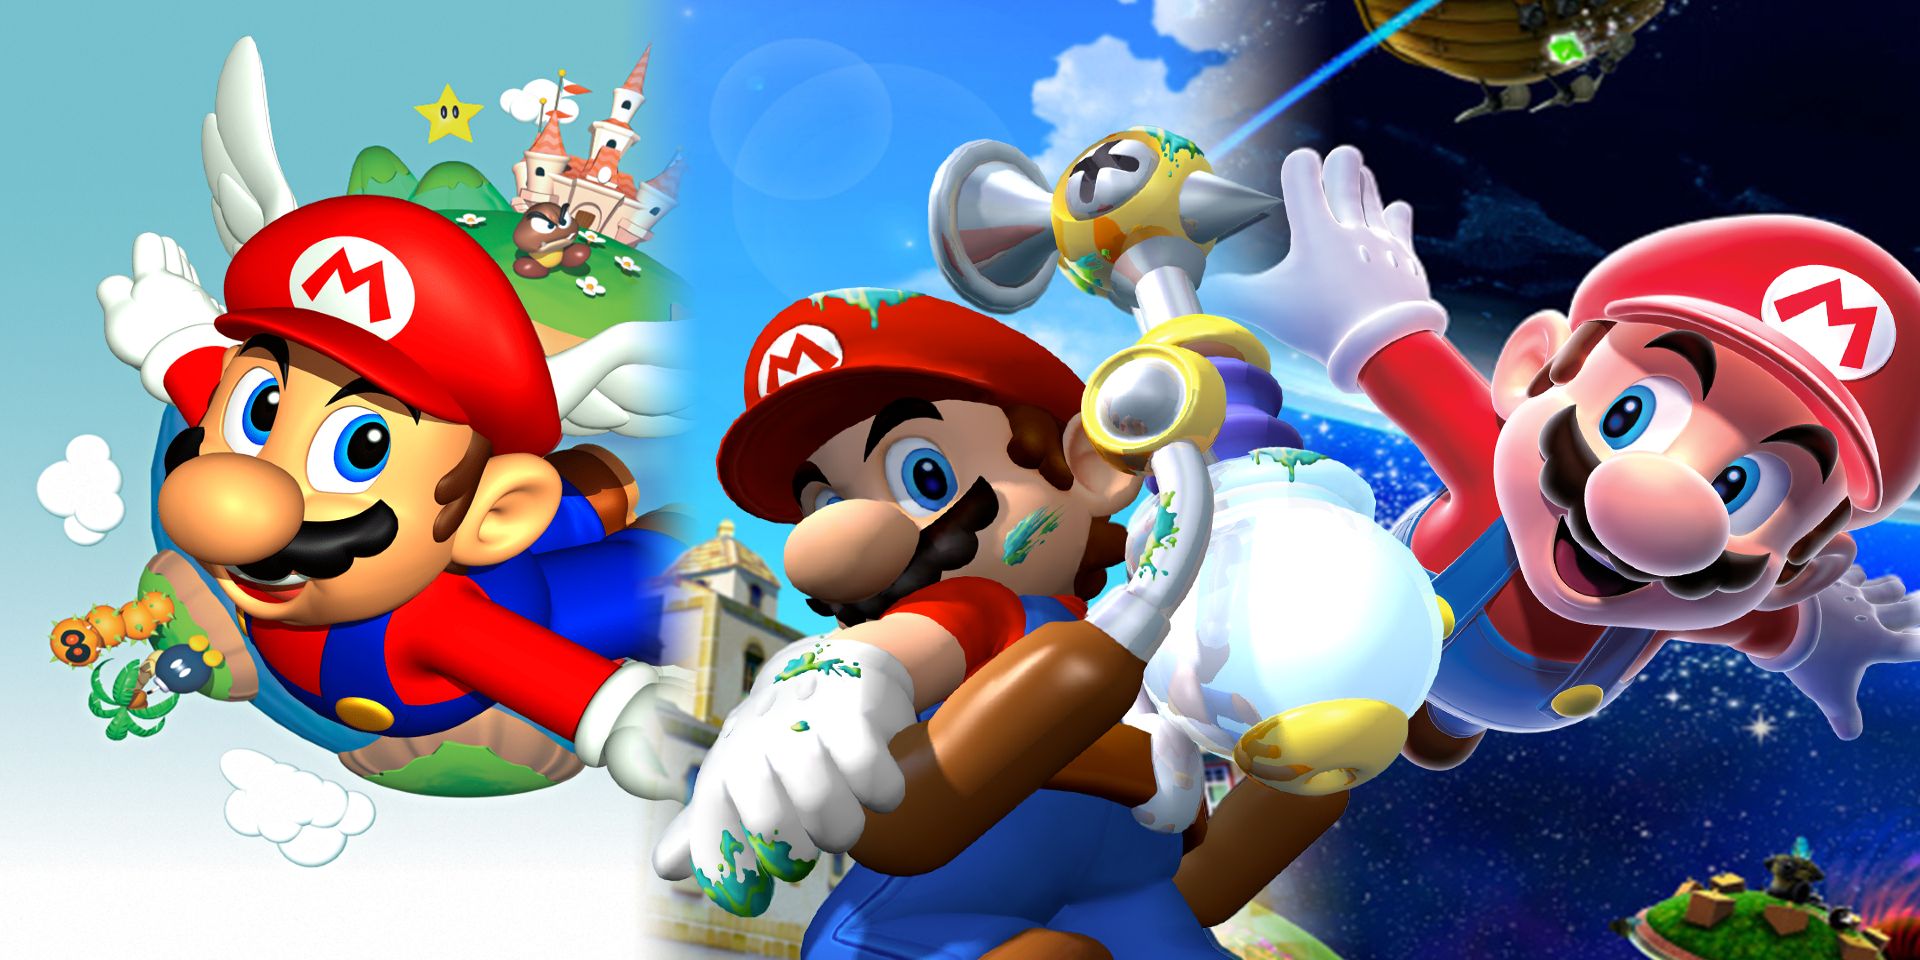 Every Mario Game On Nintendo Switch, Ranked Worst To Best